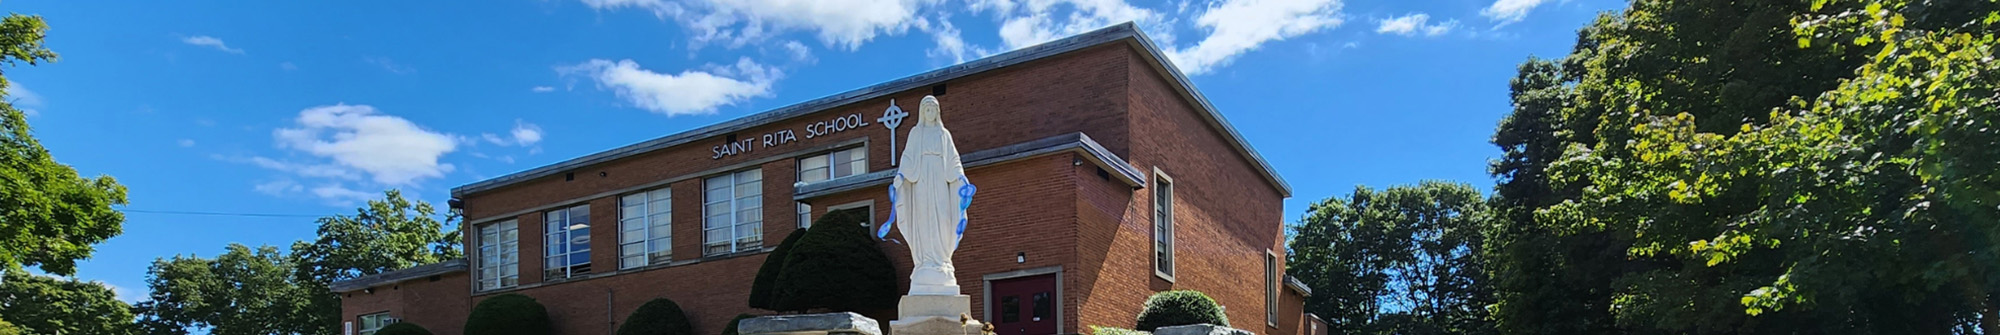 school building with Mary statue in foreground